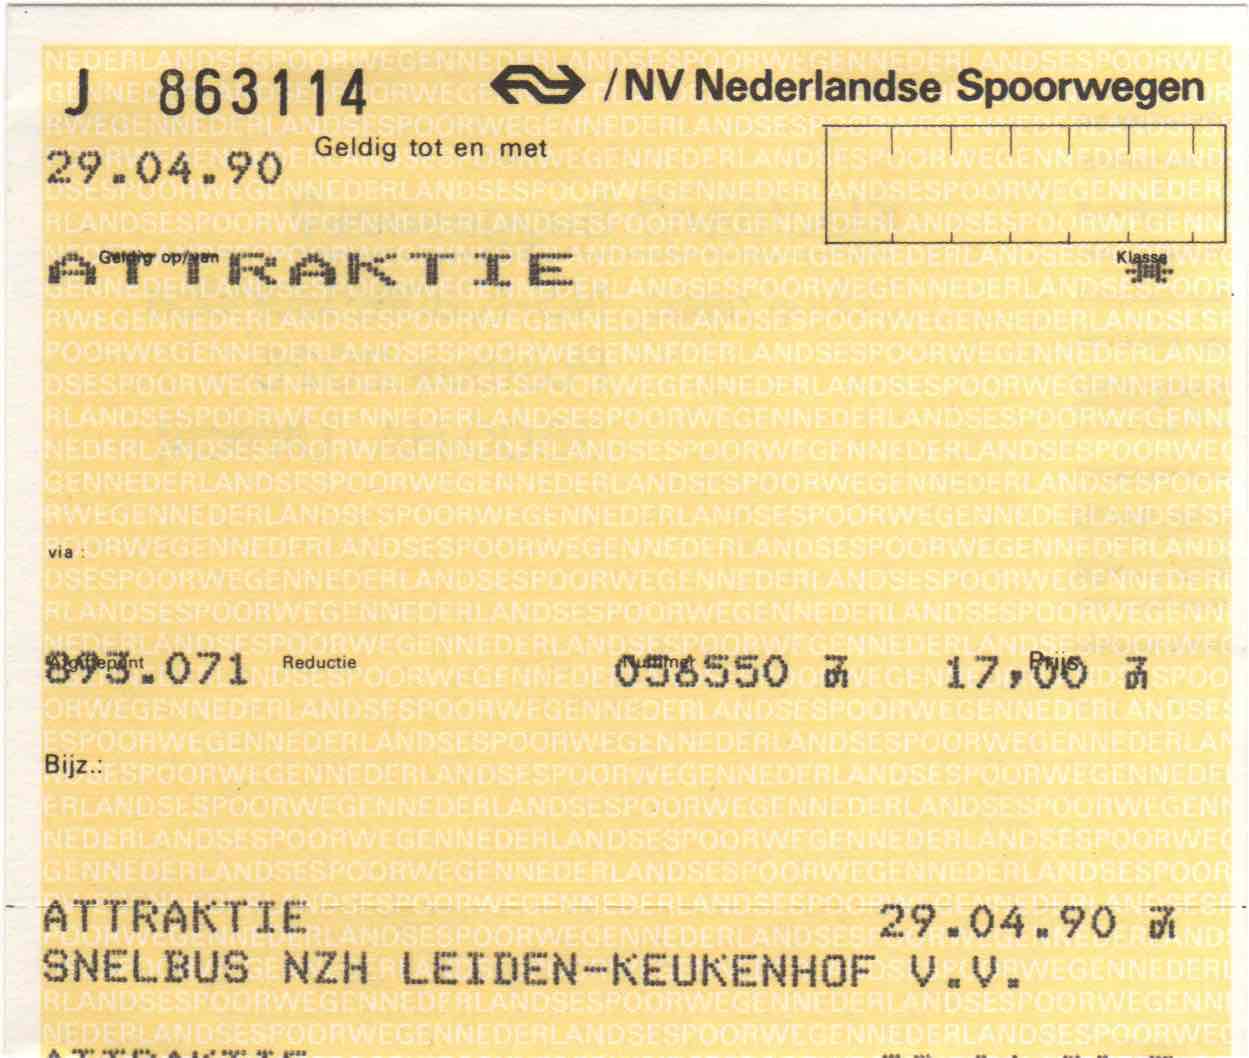 ticket for NZH bus and entrance to Keukenhof (1990)